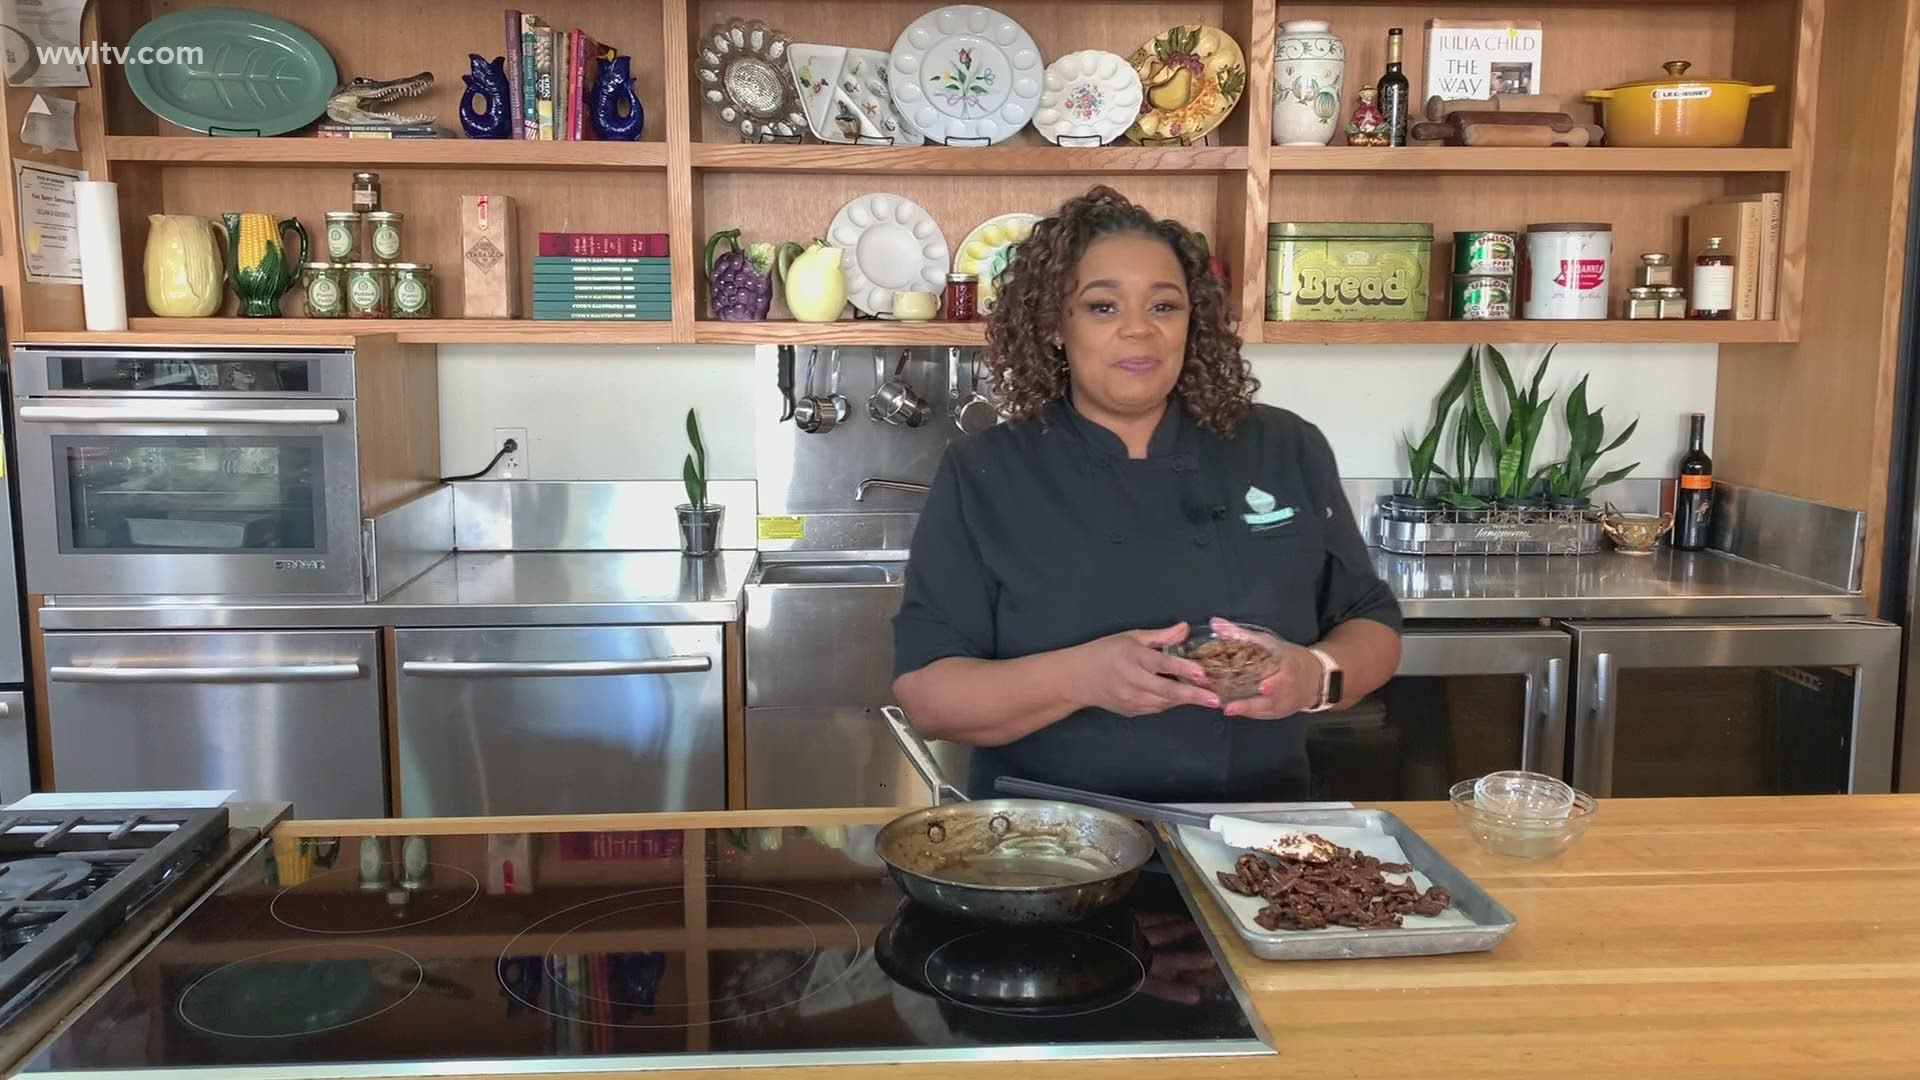 Chef Dee Lavigne from the Southern Food and Beverage Museum shows how to make spiced candied pecans. More info: southernfood.org.